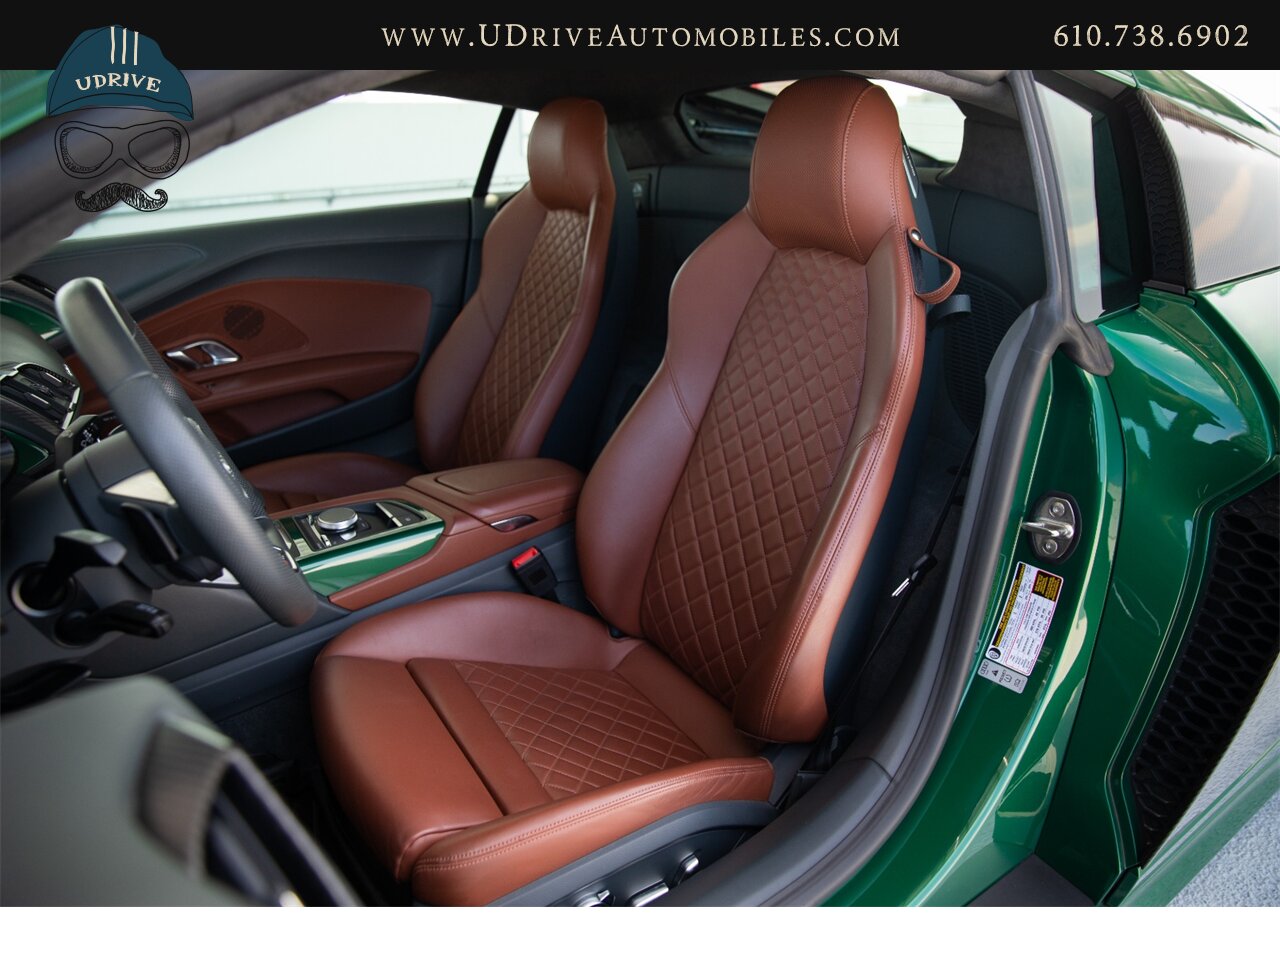 2017 Audi R8 Audi Exclusive Avocado Green Vermont Brown Leather  Diamond Stitching V10 Carbon Fiber - Photo 6 - West Chester, PA 19382